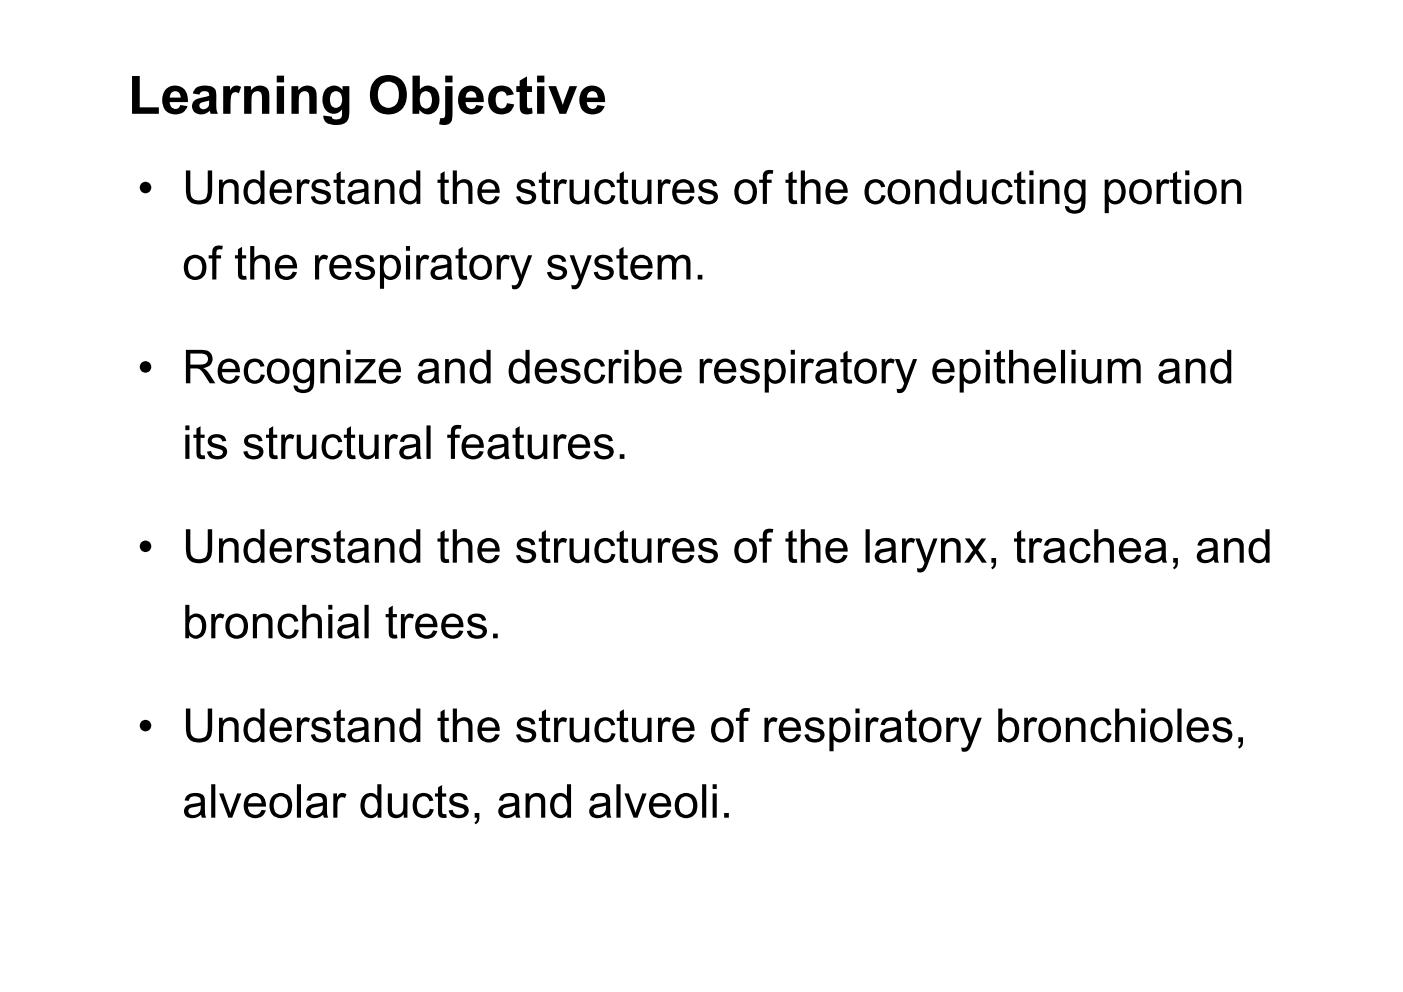 block9_04.jpg - Learning Objective¡E Understand the structures of the conducting portion  of the respiratory system.¡E Recognize and describe respiratory epithelium and  its structural features.¡E Understand the structures of the larynx, trachea, and  bronchial trees.¡E Understand the structure of respiratory bronchioles,  alveolar ducts, and alveoli.